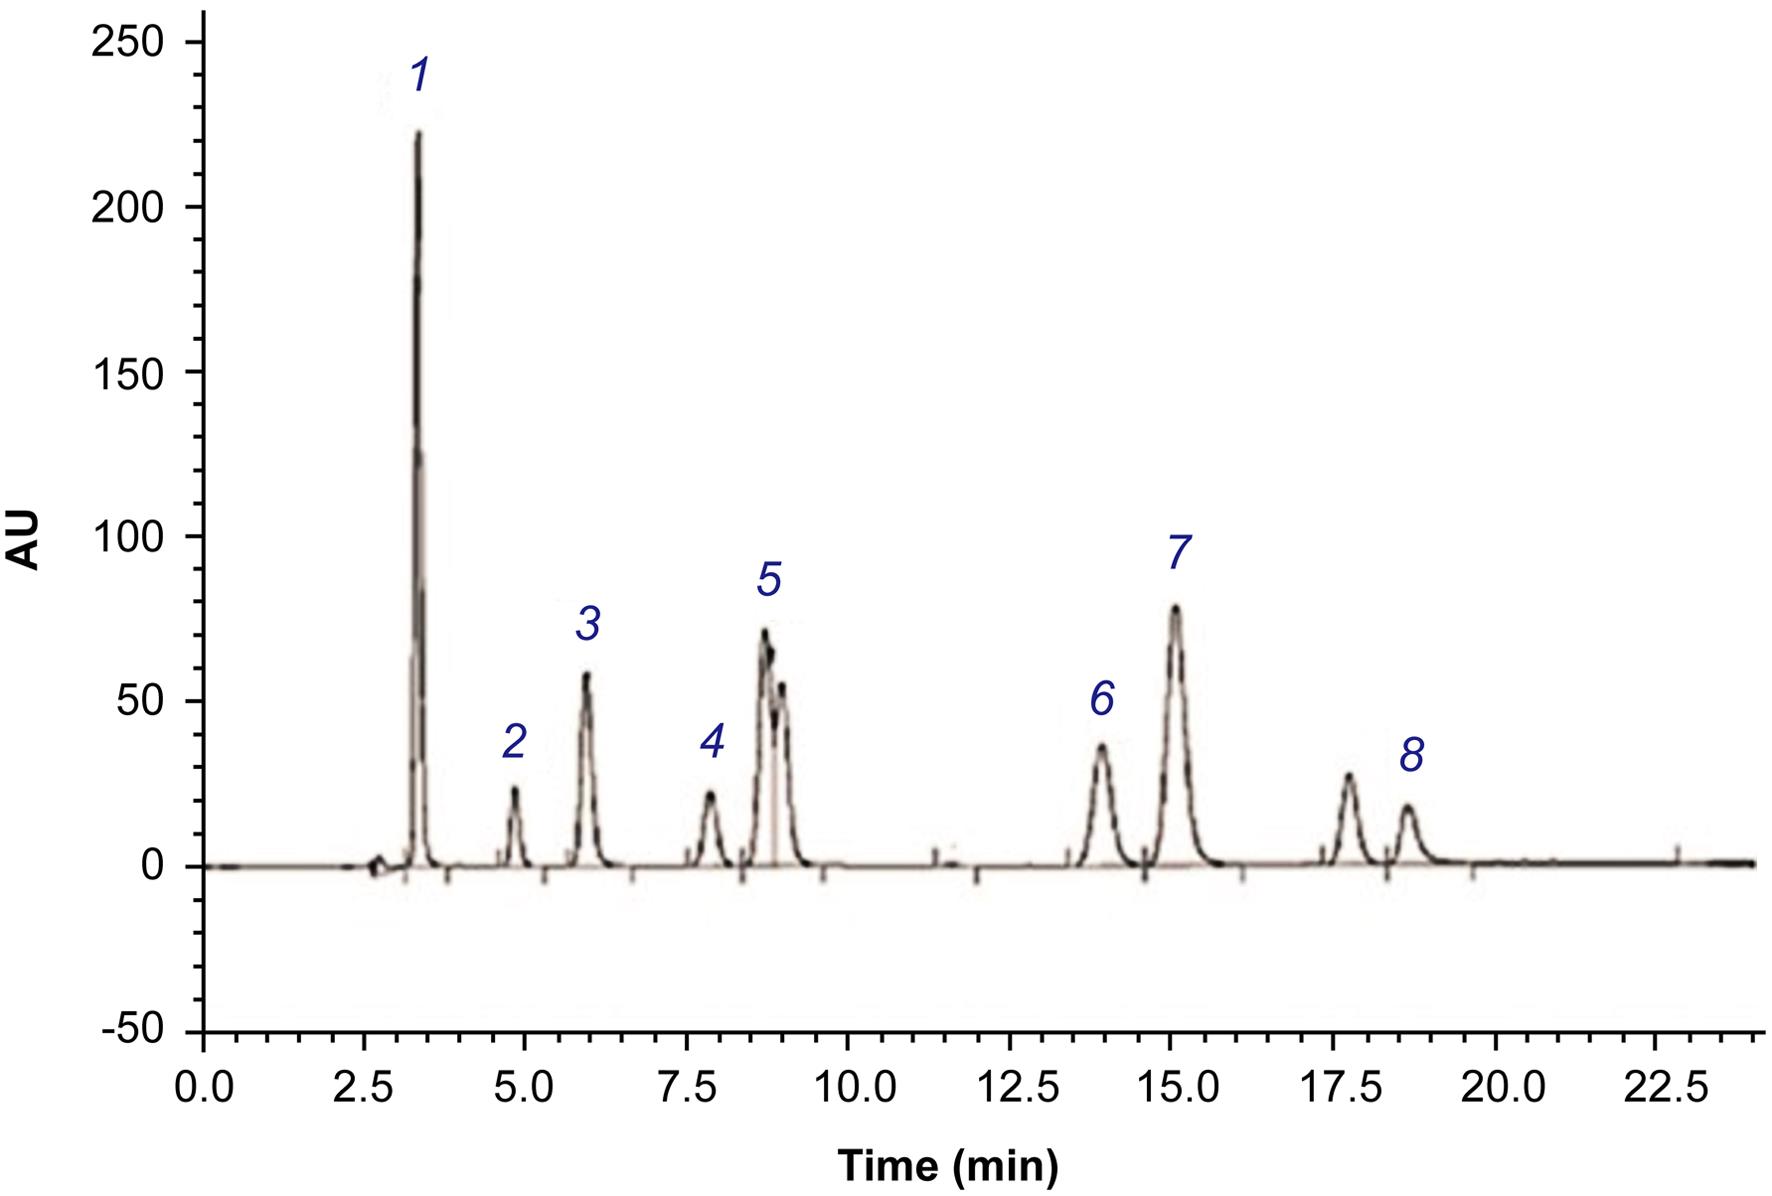 High performance liquid chromatography chromatogram of phenolic compounds of date seed extracts.